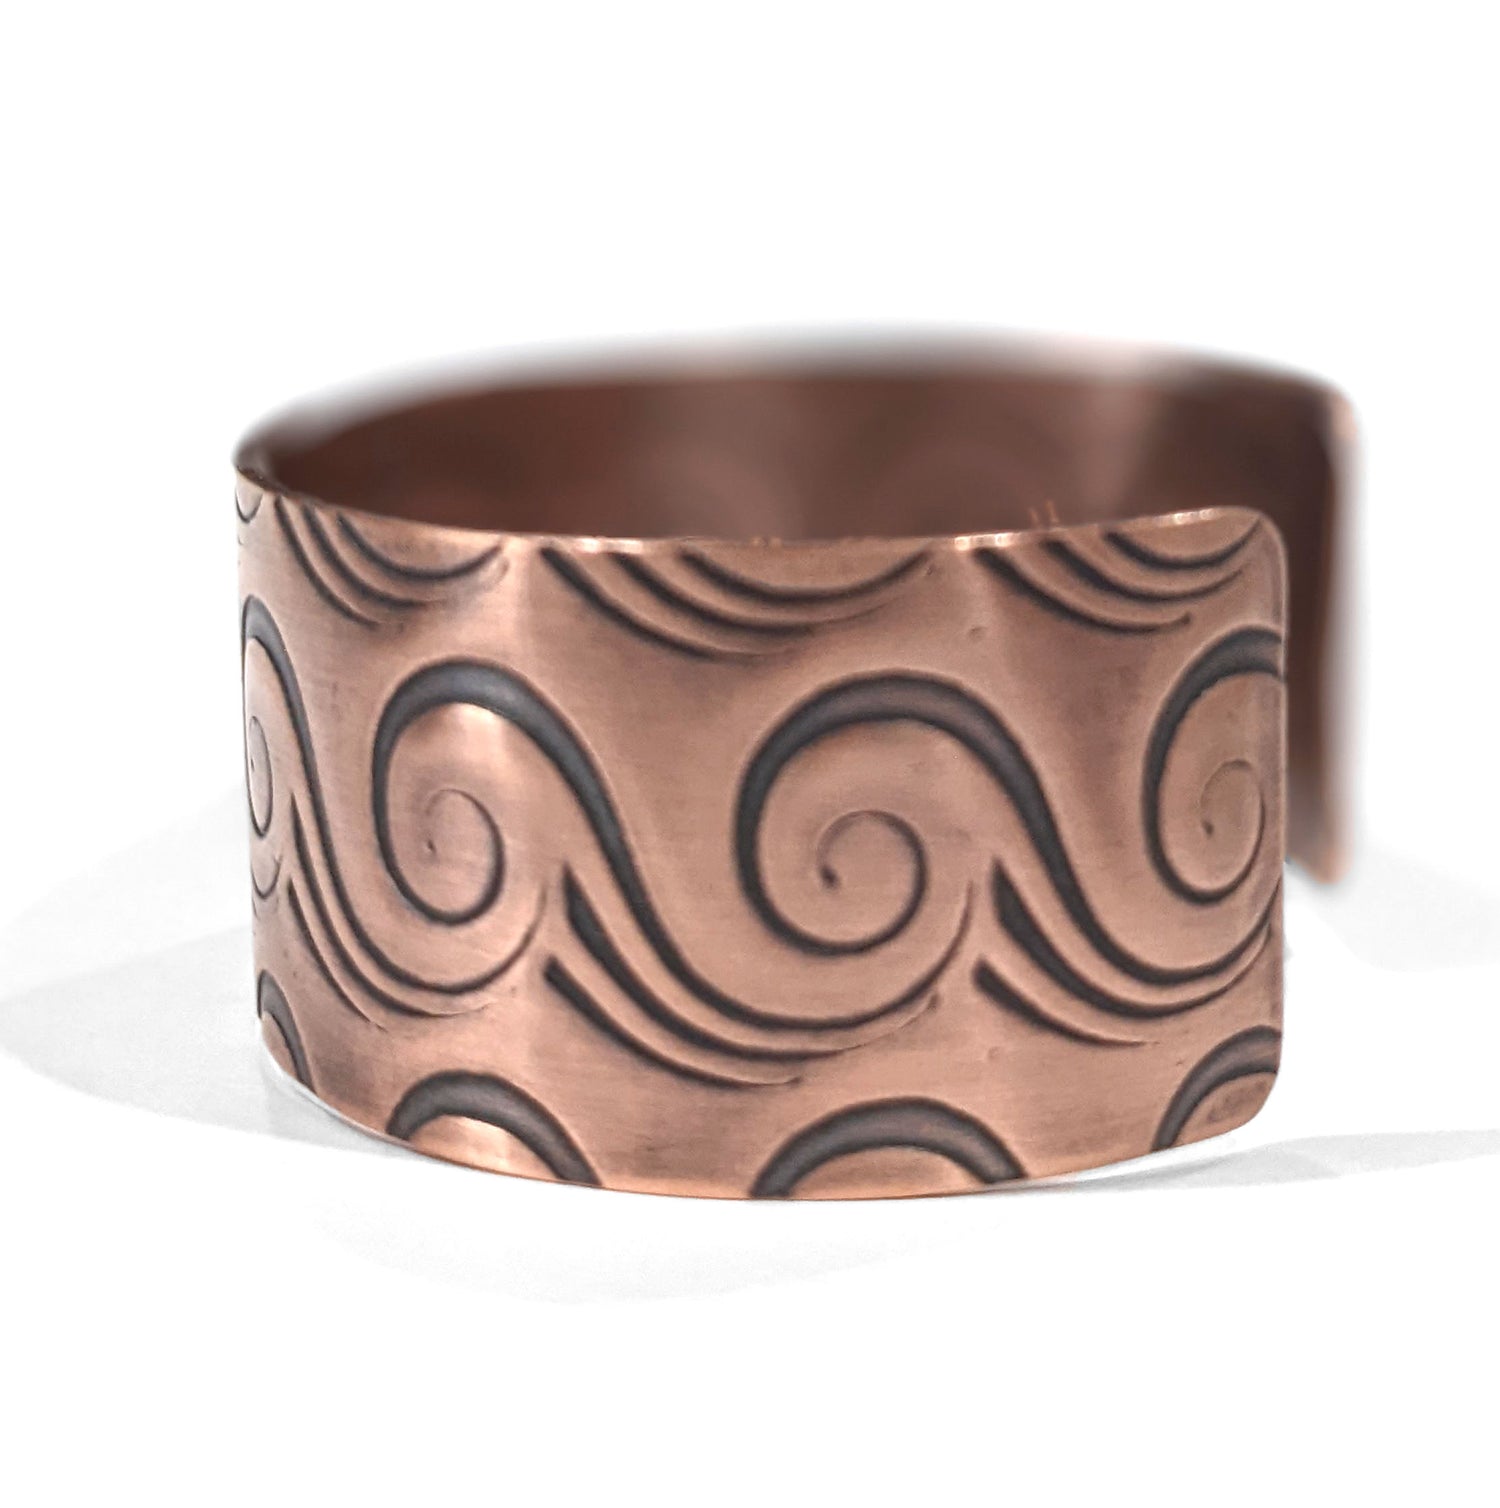 Copper cuff bracelet with a series of abstract line waves that wrap the entire cuff. Meant to resemble an ocean wave. Side view.